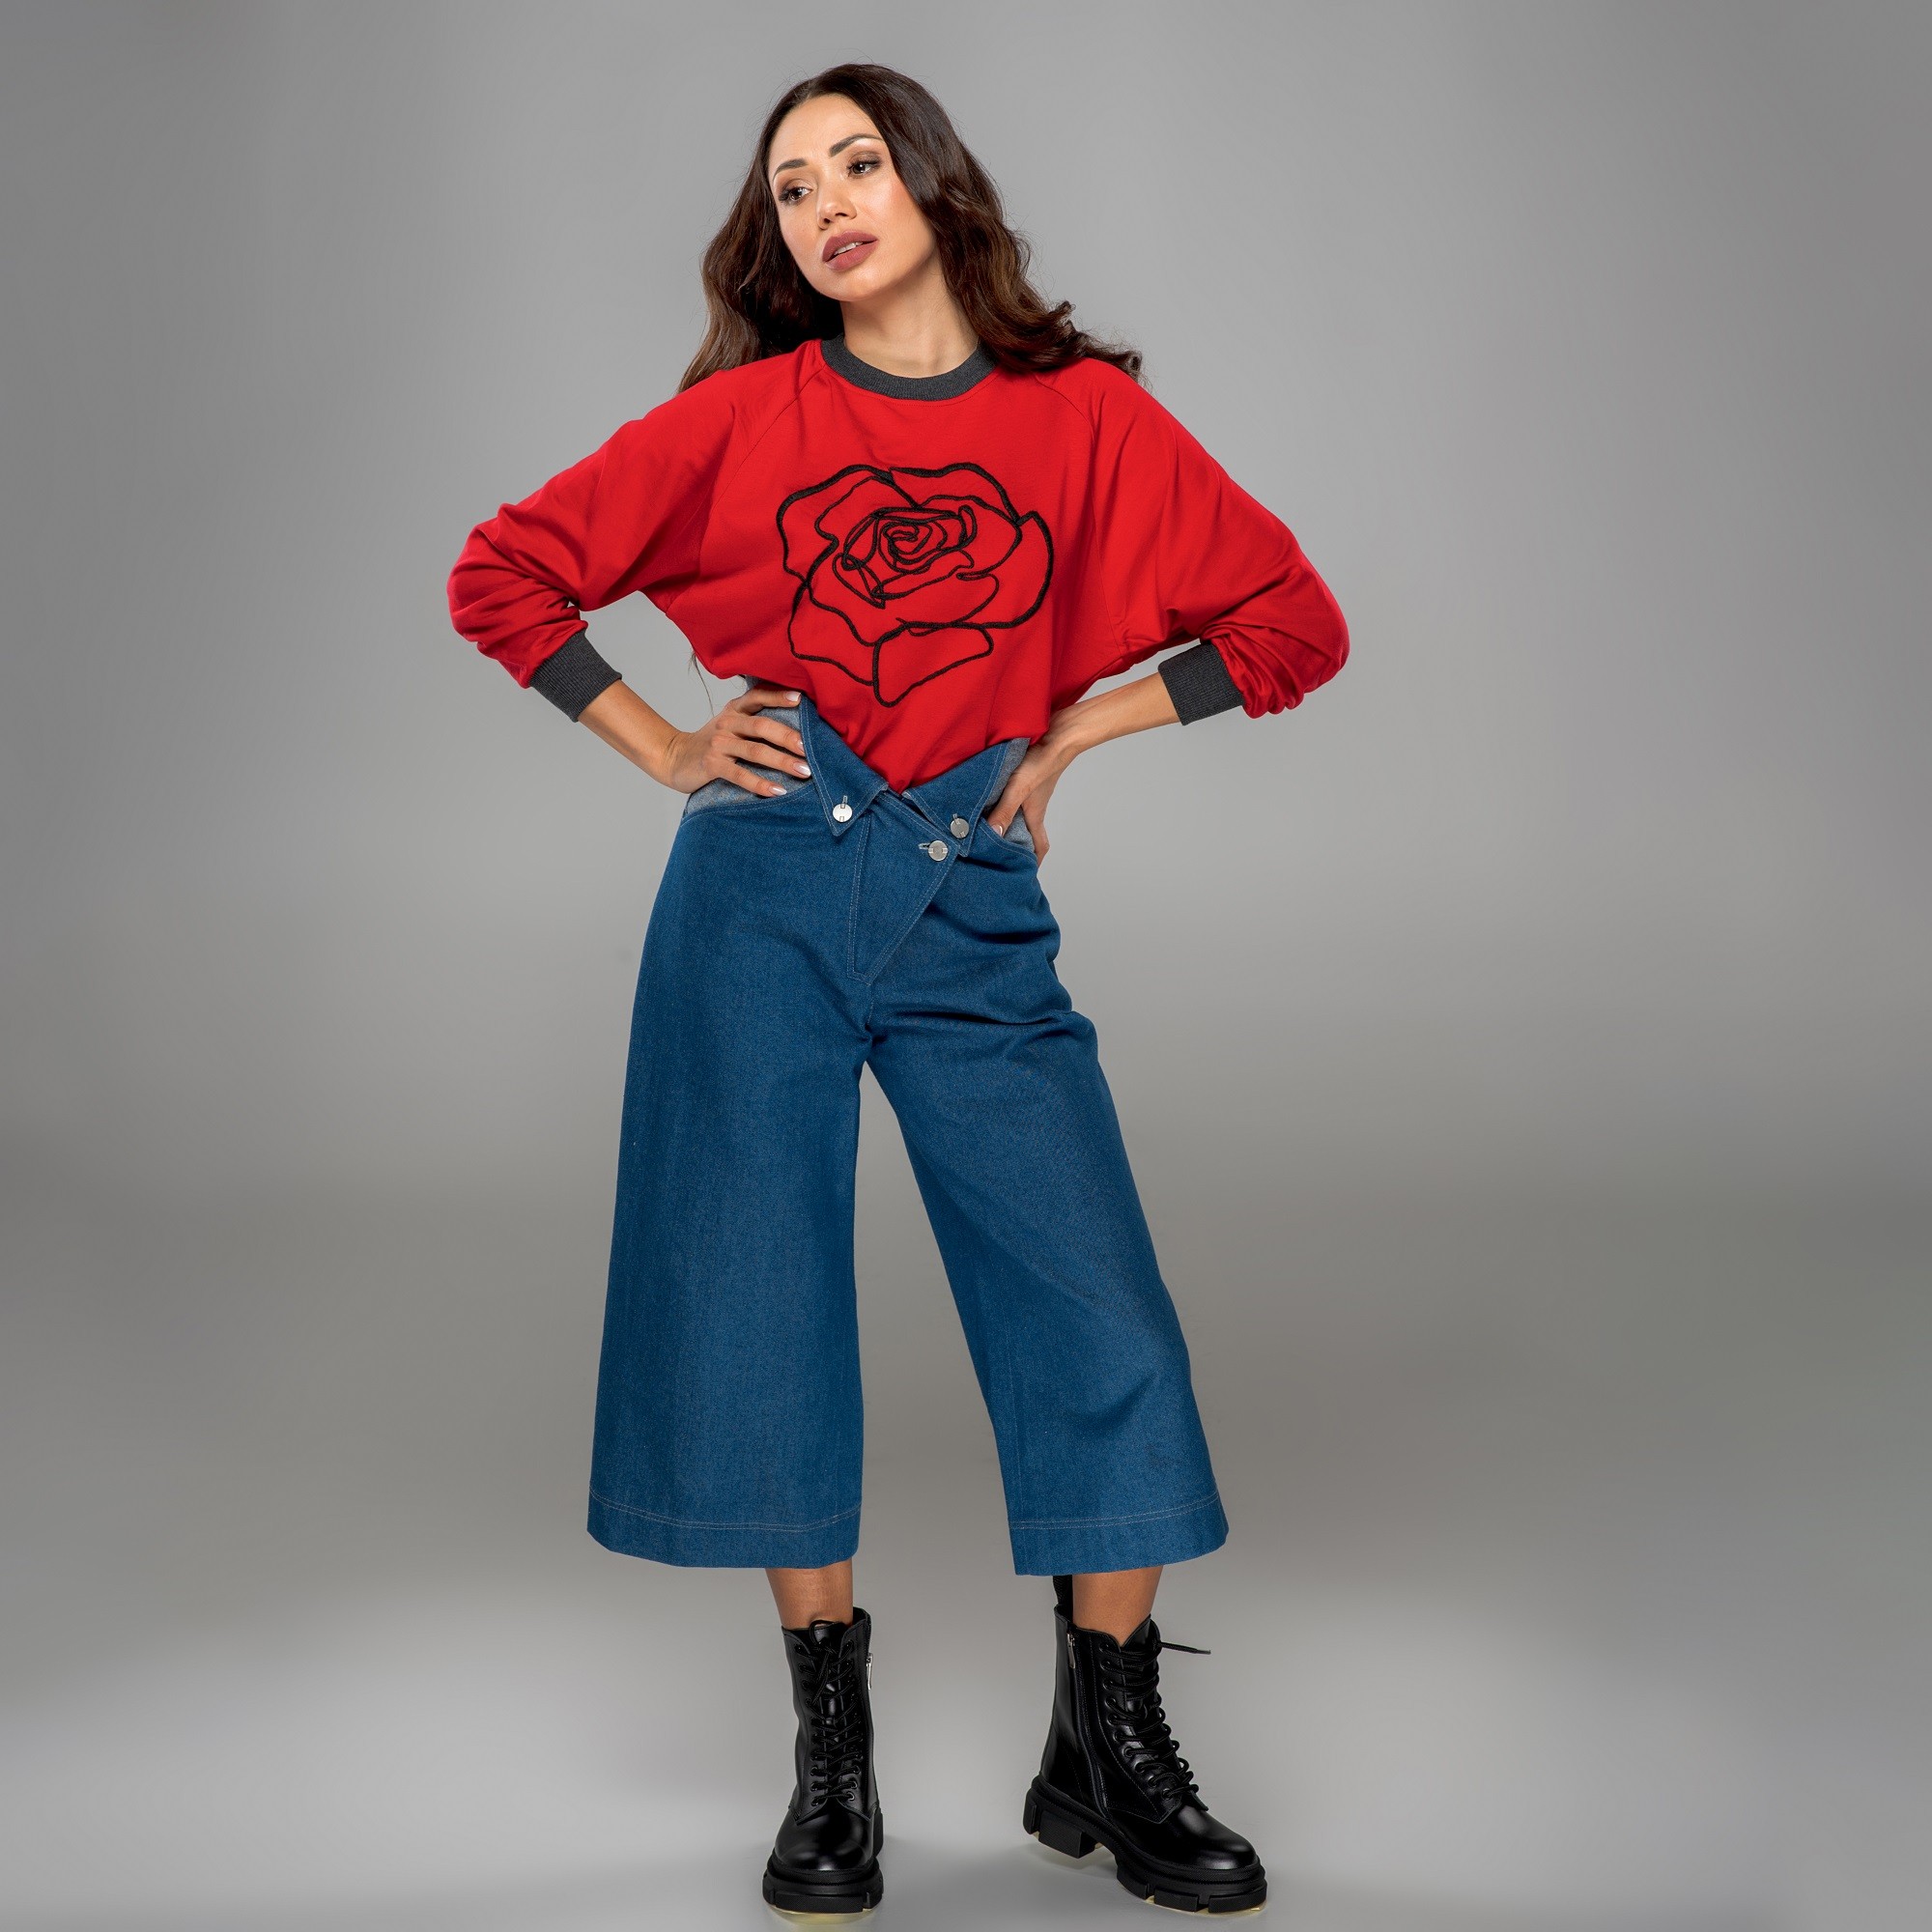 Sweatshirt with embroidery - "Rose"